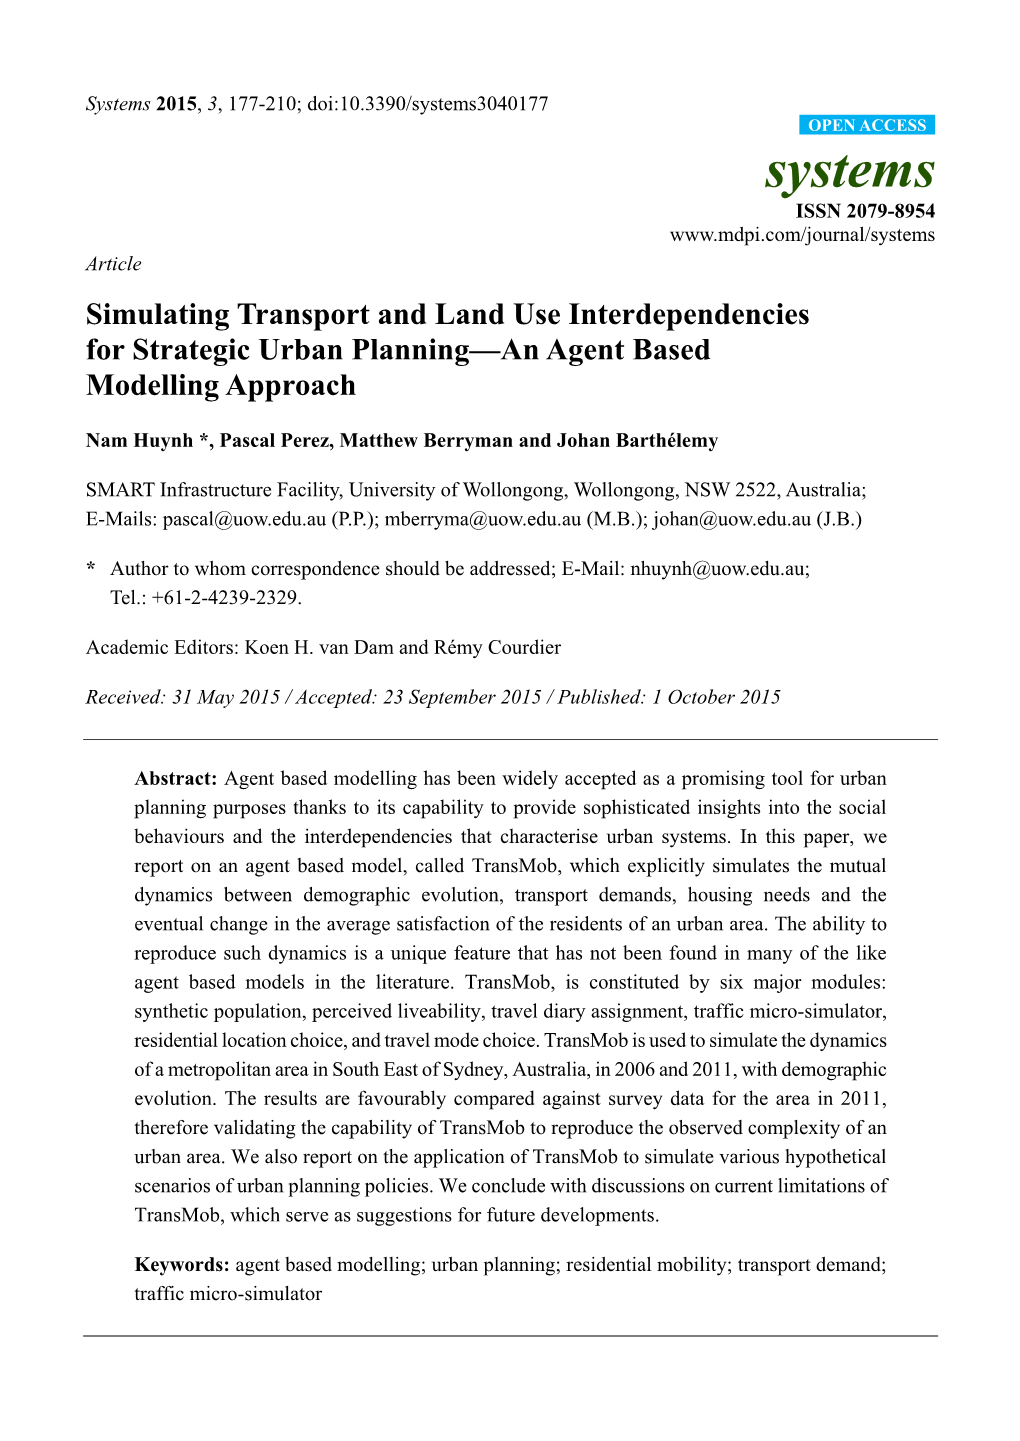 Simulating Transport and Land Use Interdependencies for Strategic Urban Planning—An Agent Based Modelling Approach